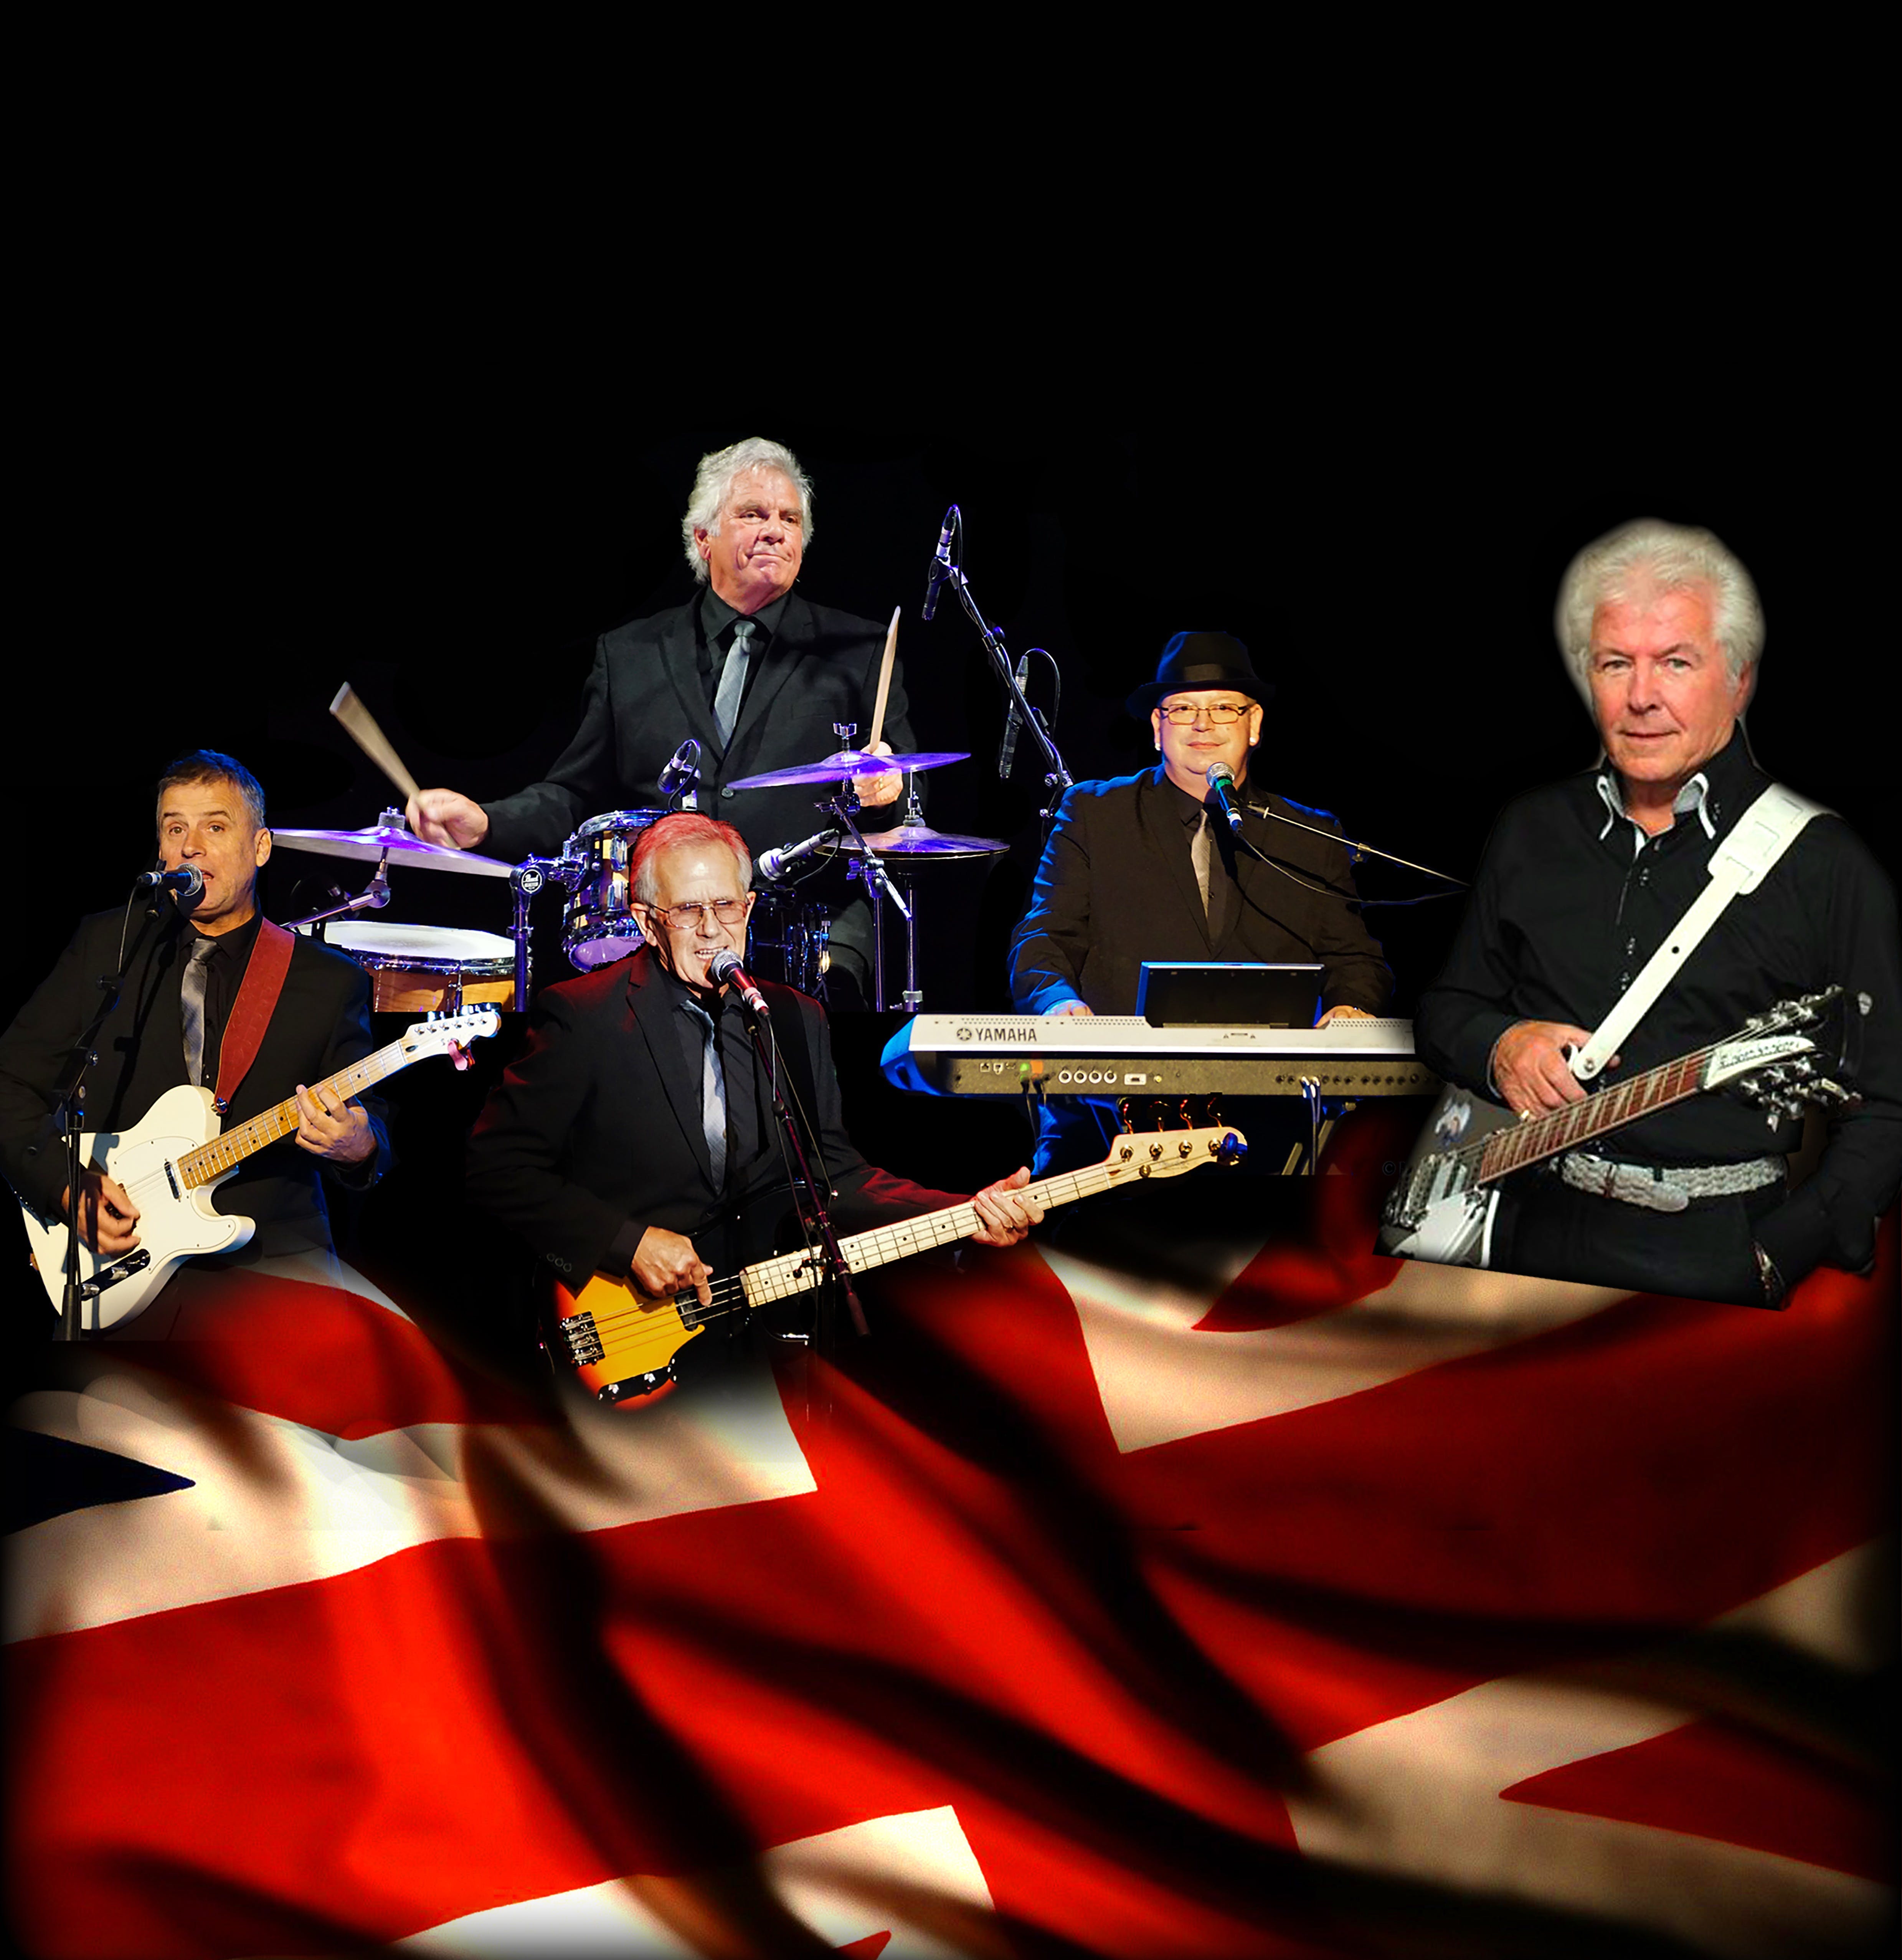 Herman's Hermits with Special Guest Mike Pender - The Six O'Clock Hop - Nambucca Heads Accommodation